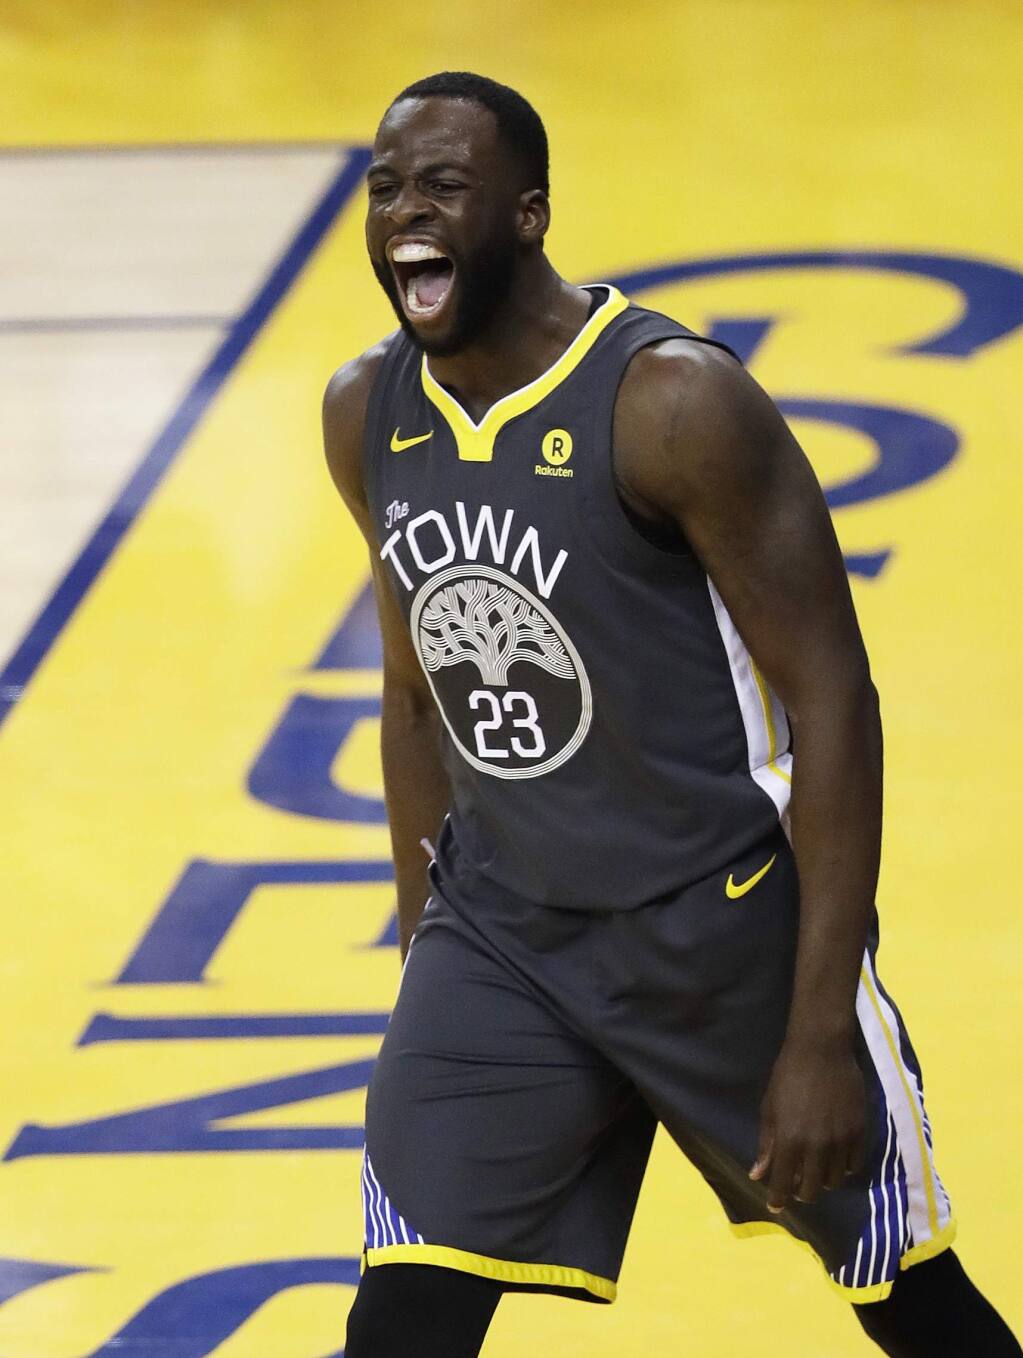 NBA Finals 2019: Analysis, update and follow-up on Kevin Durant's